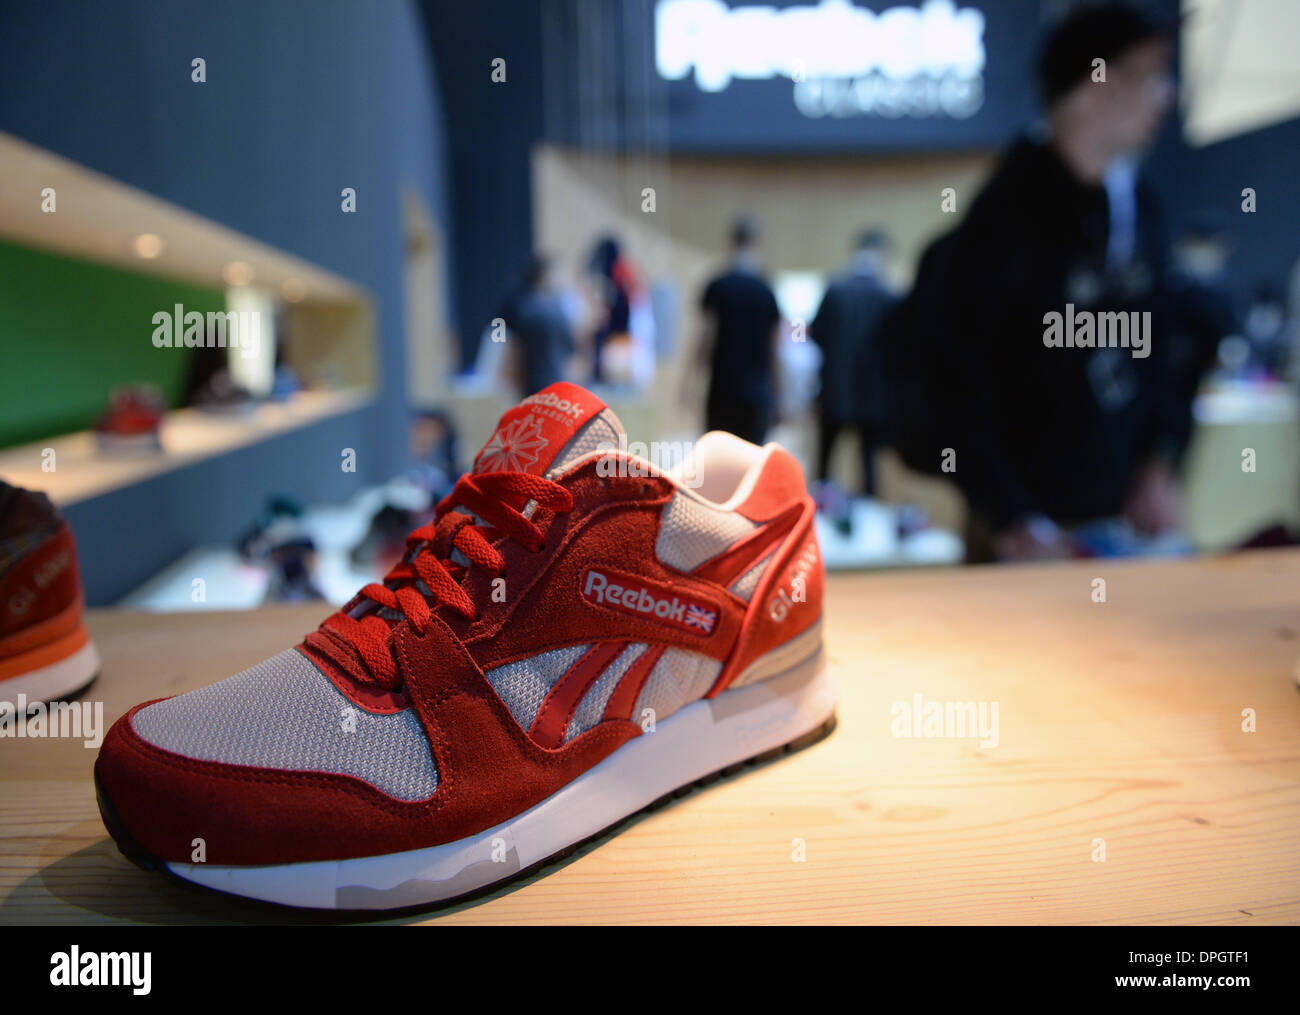 Berlin, Germany. 14th Jan, 2014. A sports shoe of US label Reebok is  pictured during the fashion fair 'Bread & Butter' in the former Tempelhof  airport in Berlin, Germany, 14 January 2014.